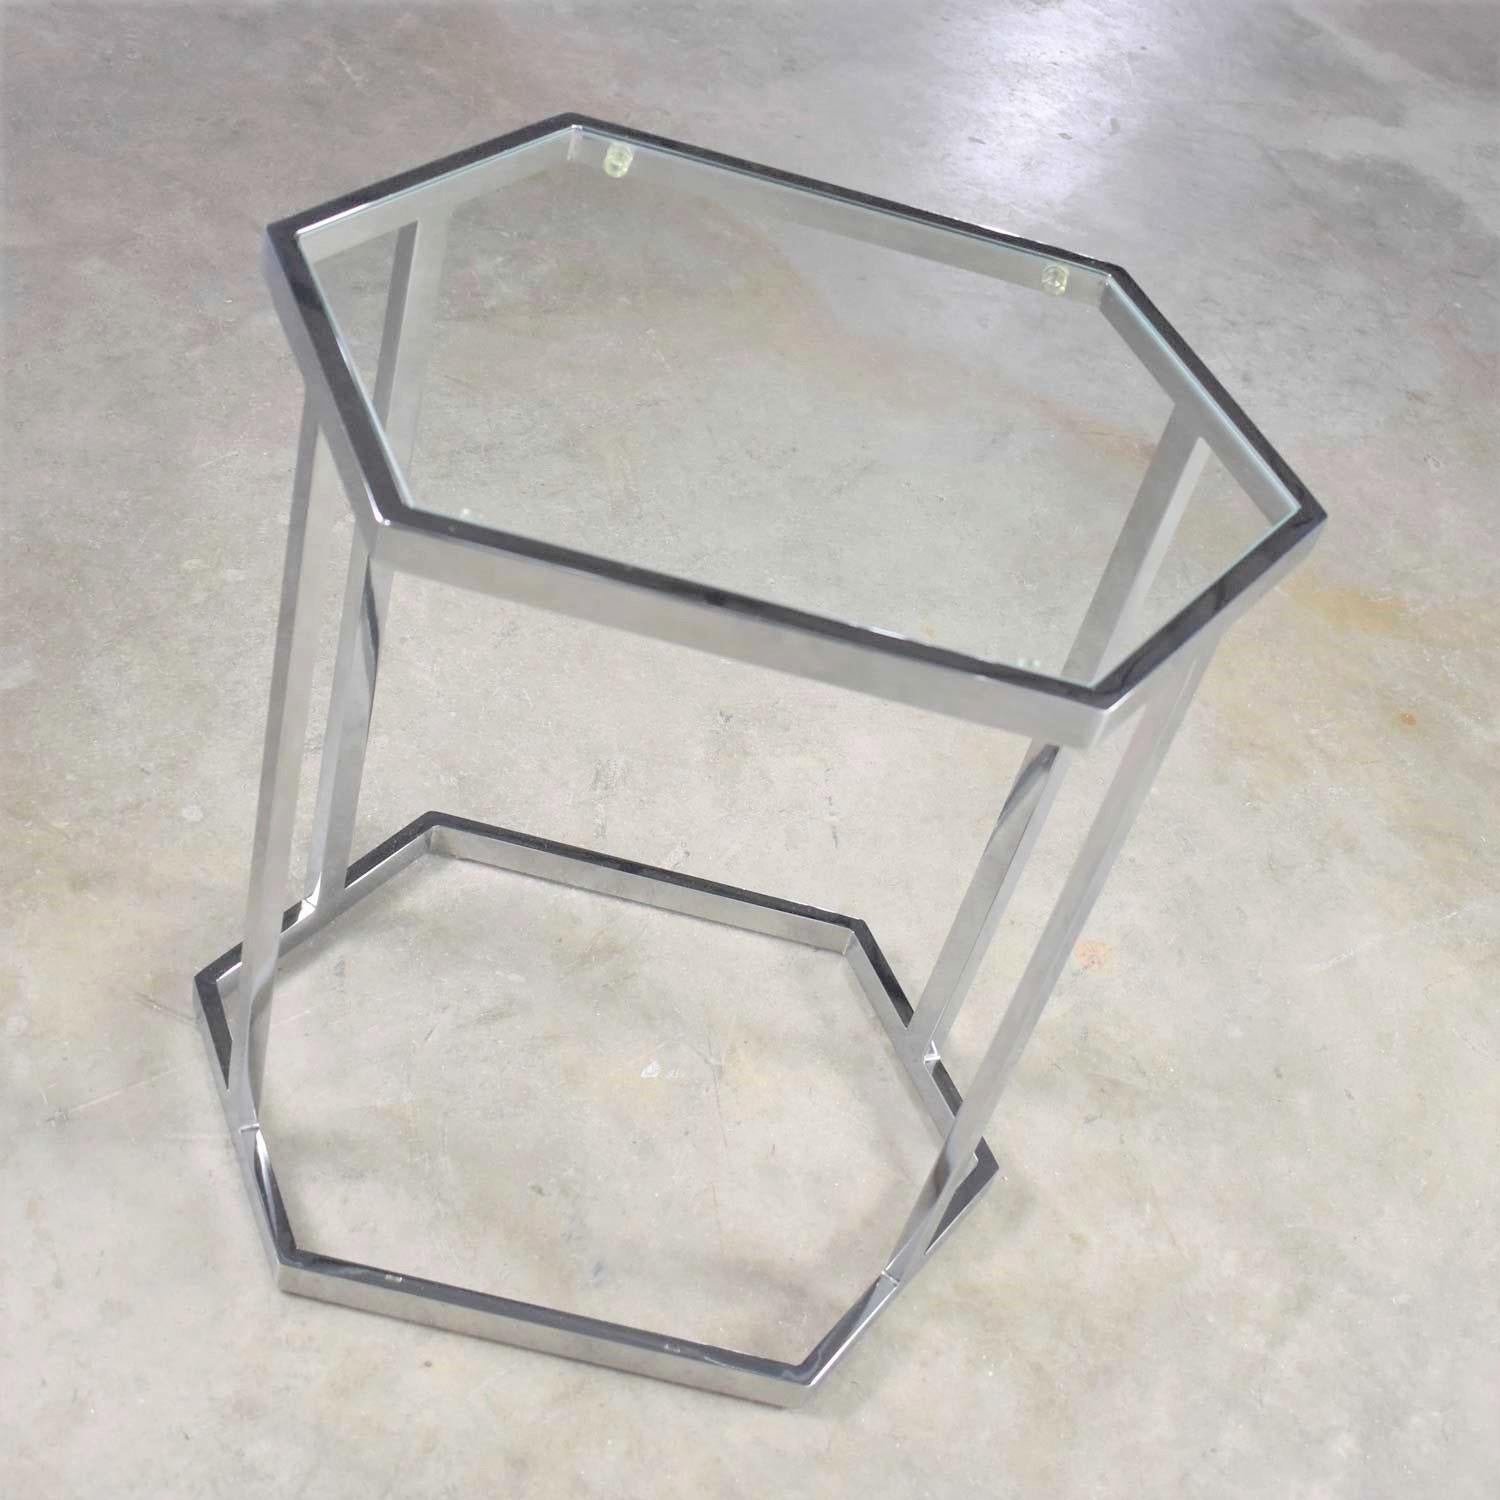 Vintage Modern Chrome and Glass Hexagon Petite Side Table or Occasional Table 1